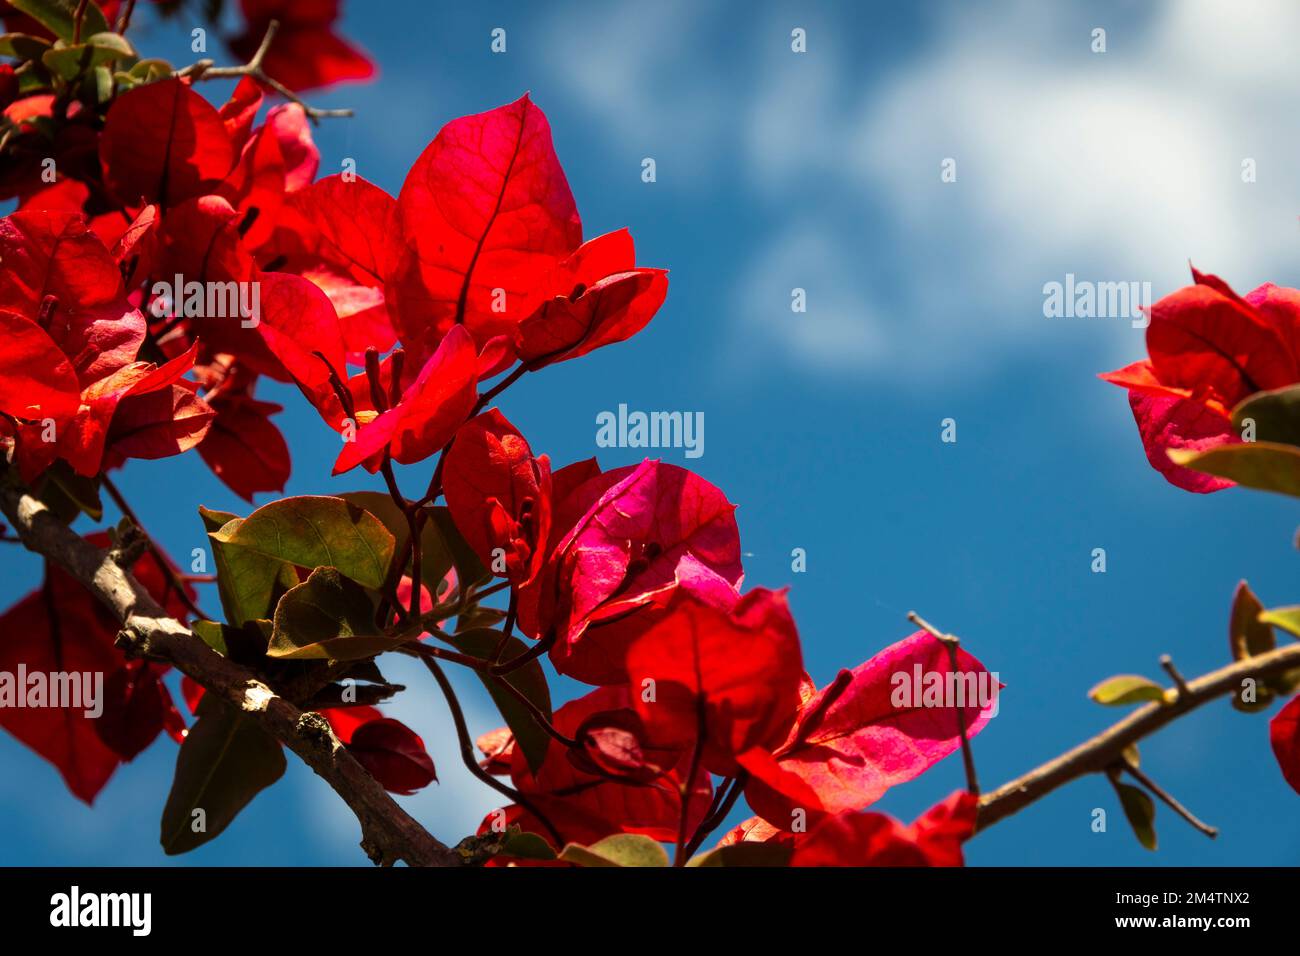 Red flowers with blue sky and white clouds, Wellington, North Island, New Zealand Stock Photo